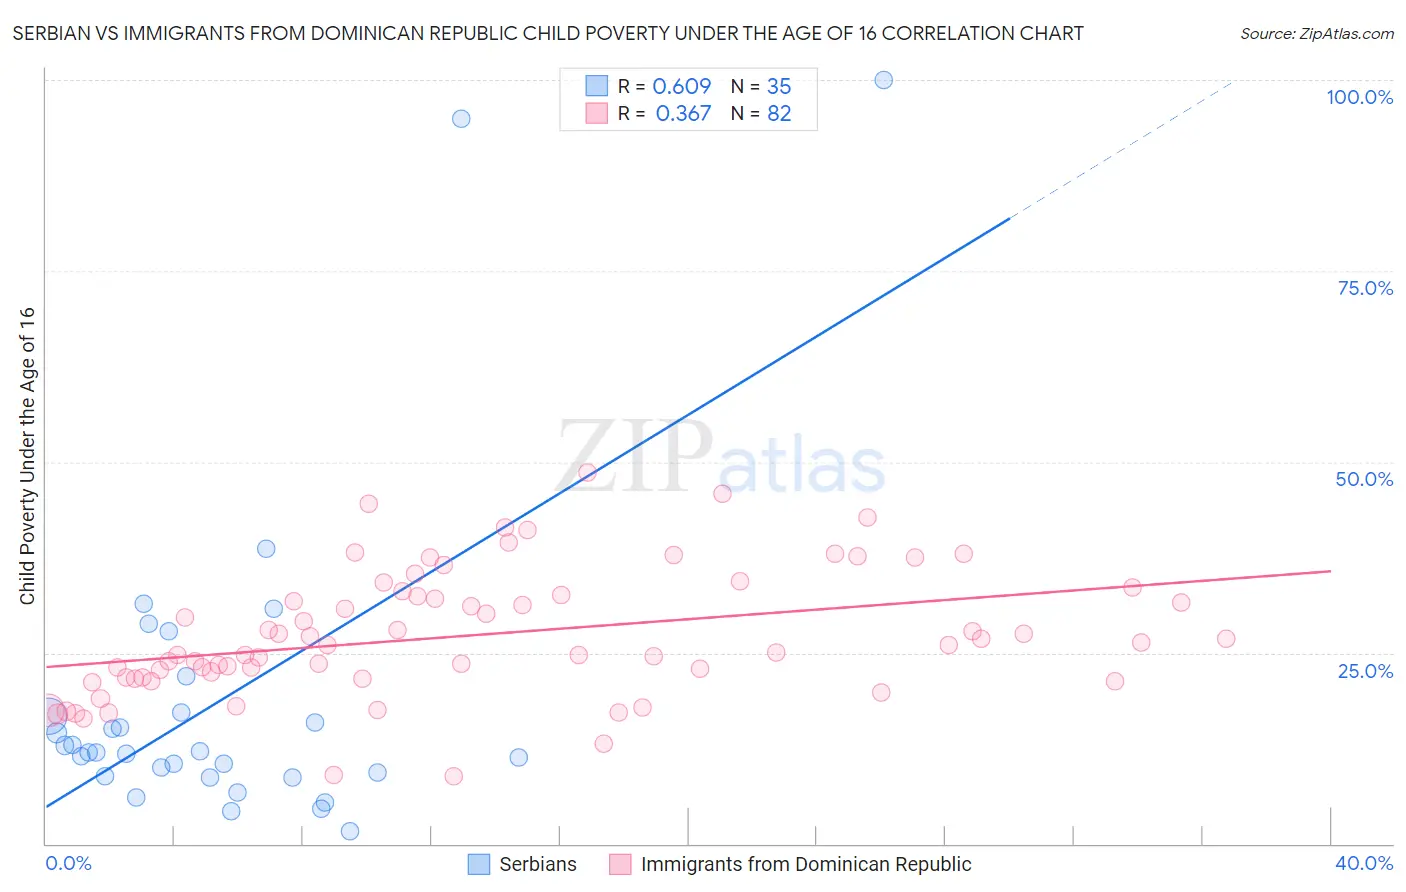 Serbian vs Immigrants from Dominican Republic Child Poverty Under the Age of 16